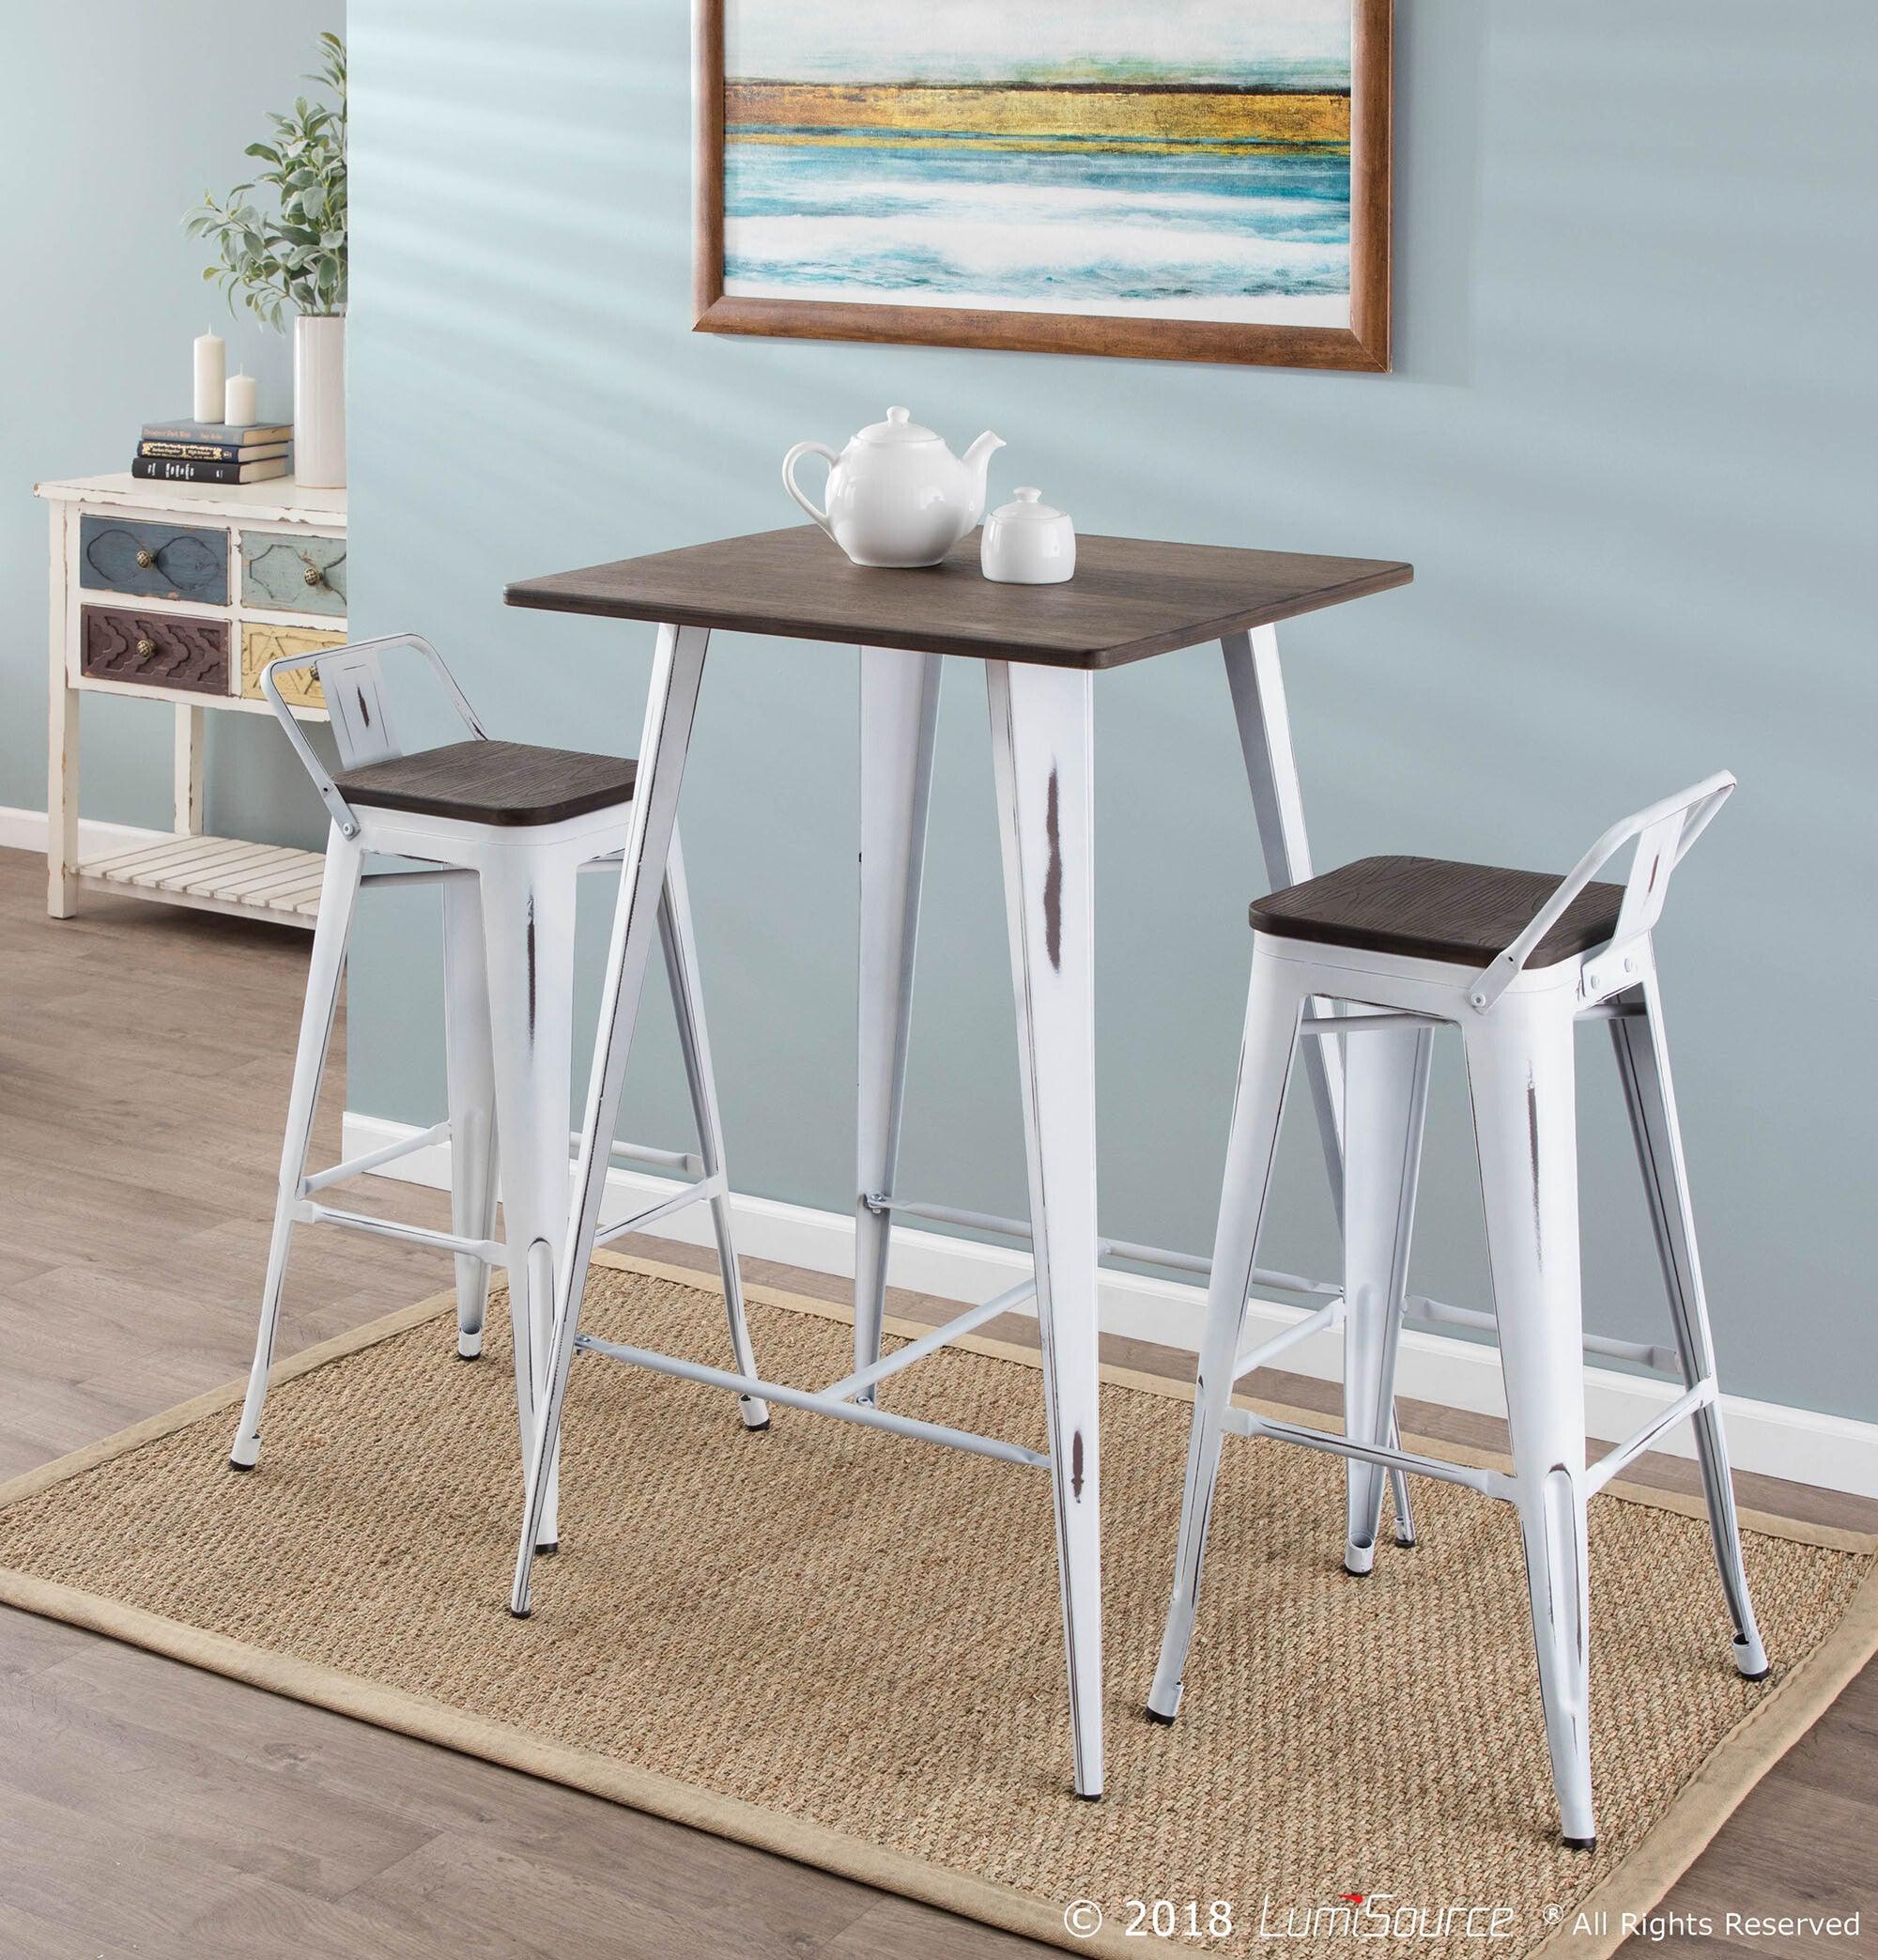 Lumisource Bar Tables - Oregon Industrial Table in Vintage White and Espresso LumiSource